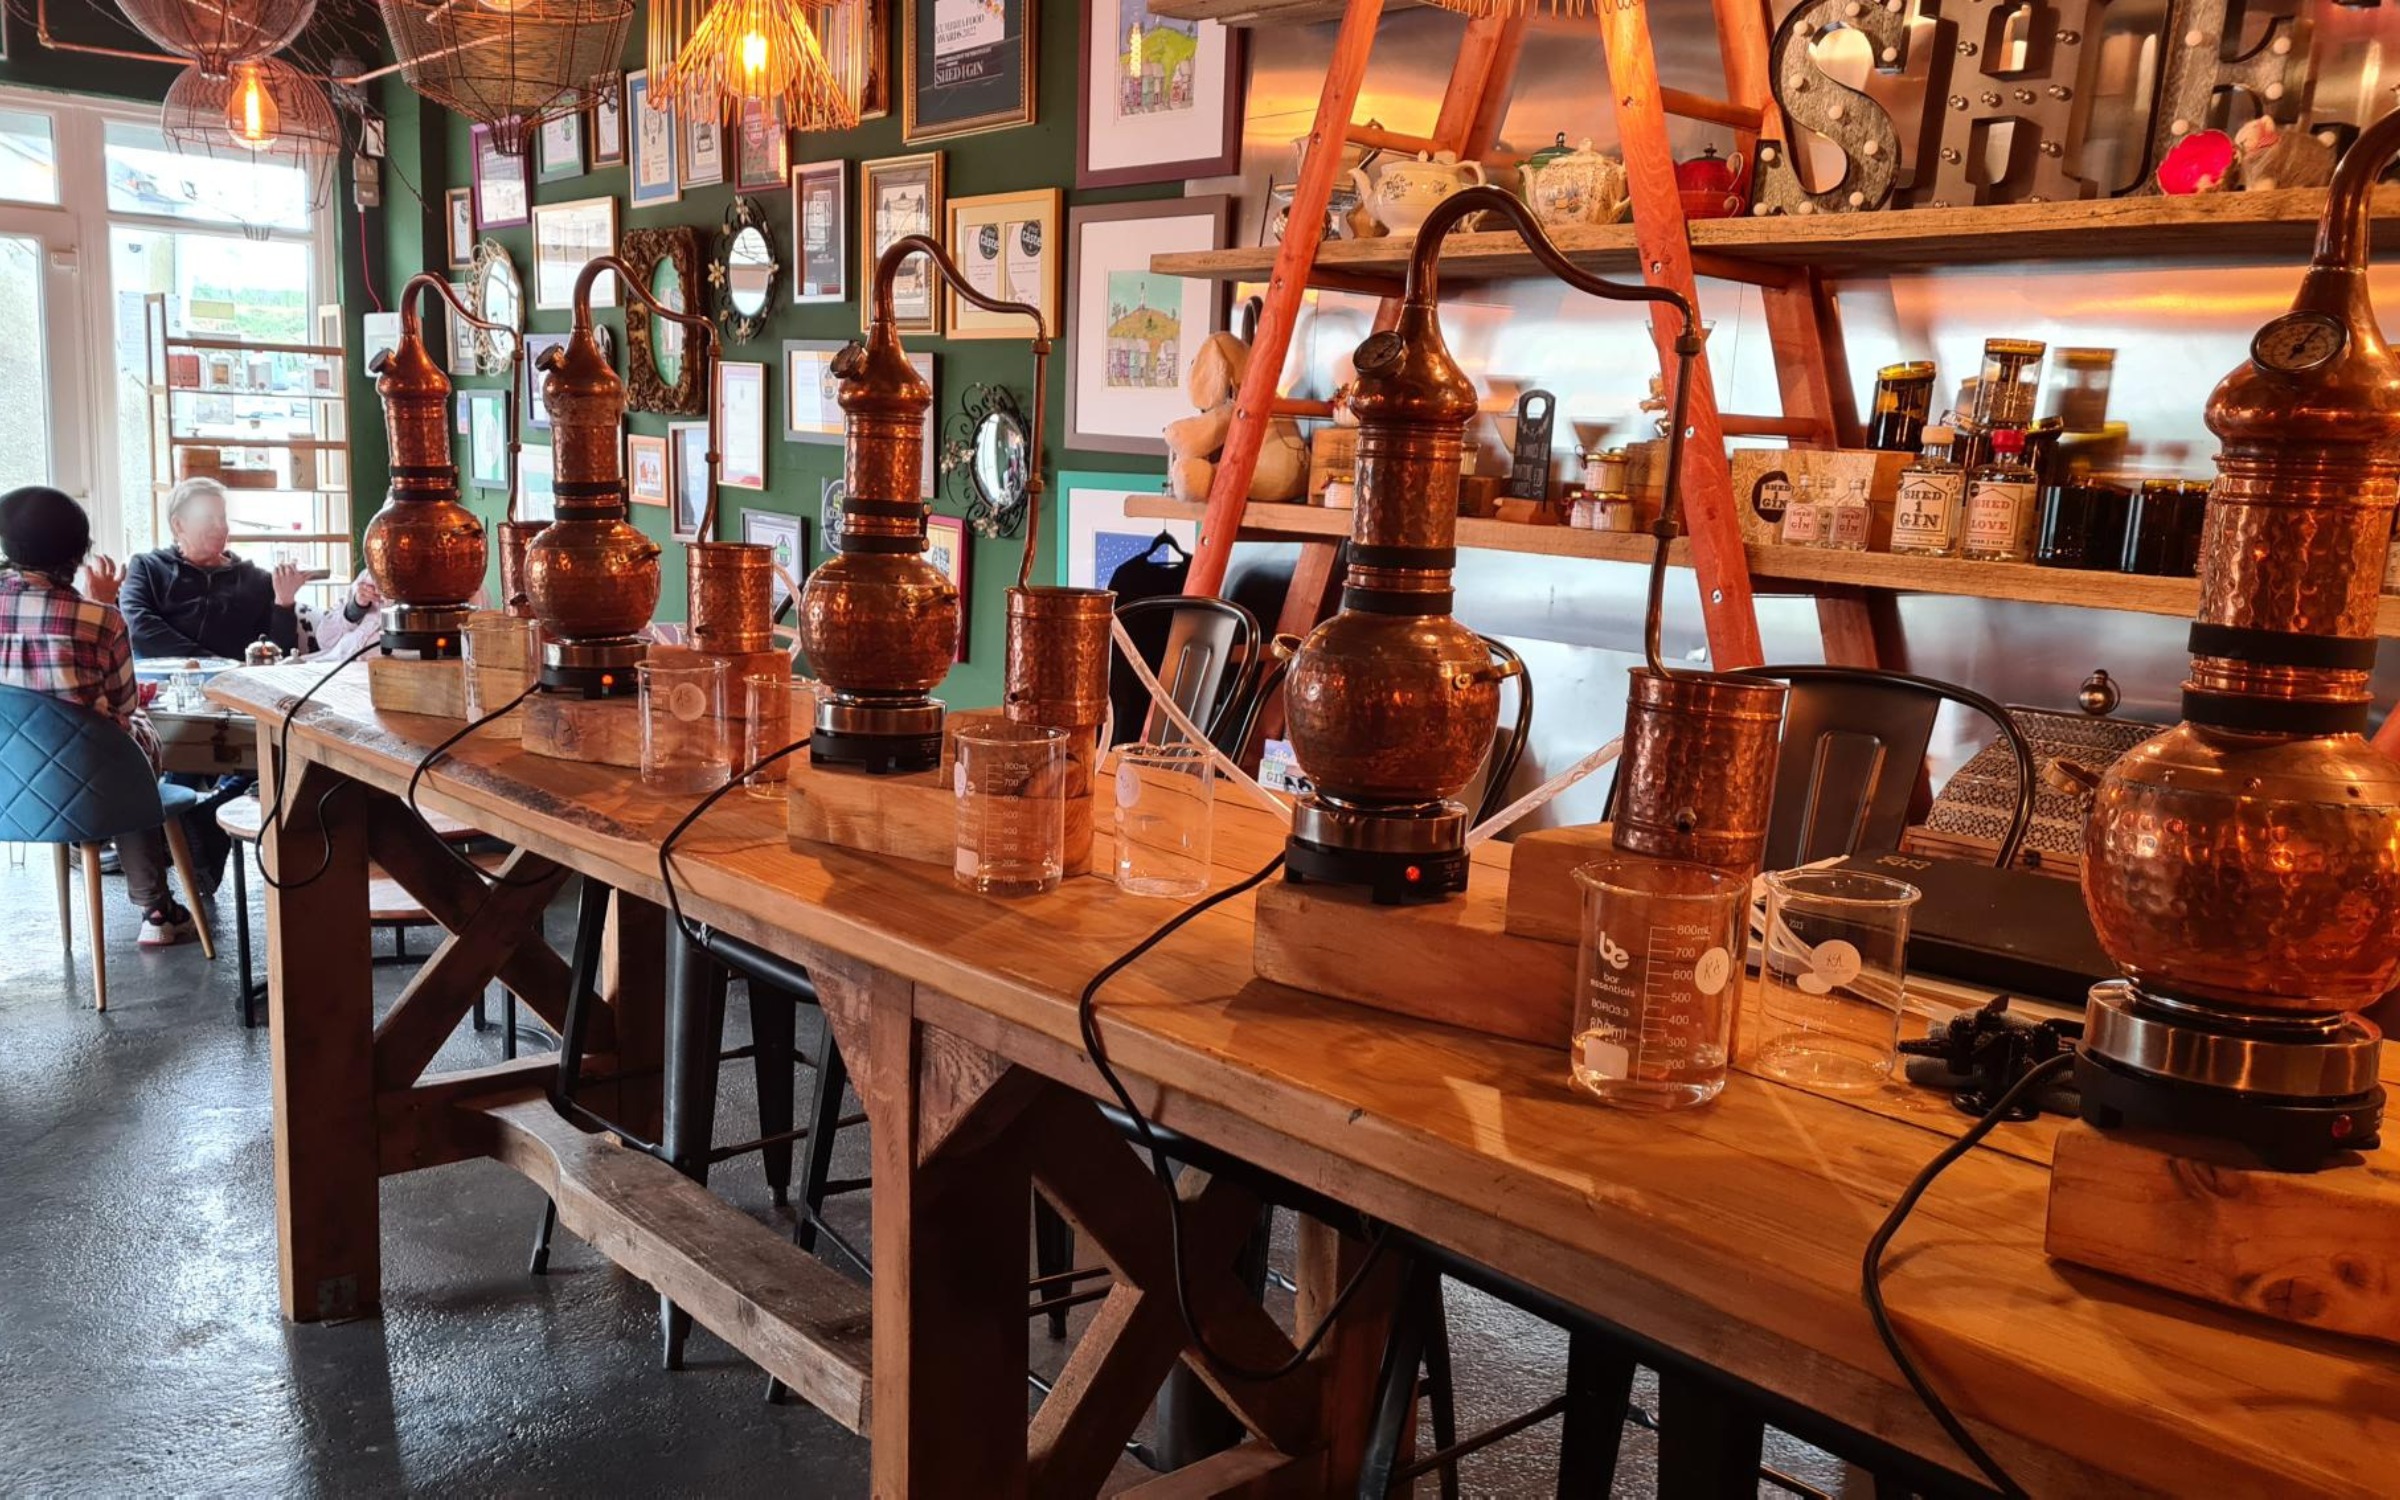 Make your own gin at Shed 1 Distillery